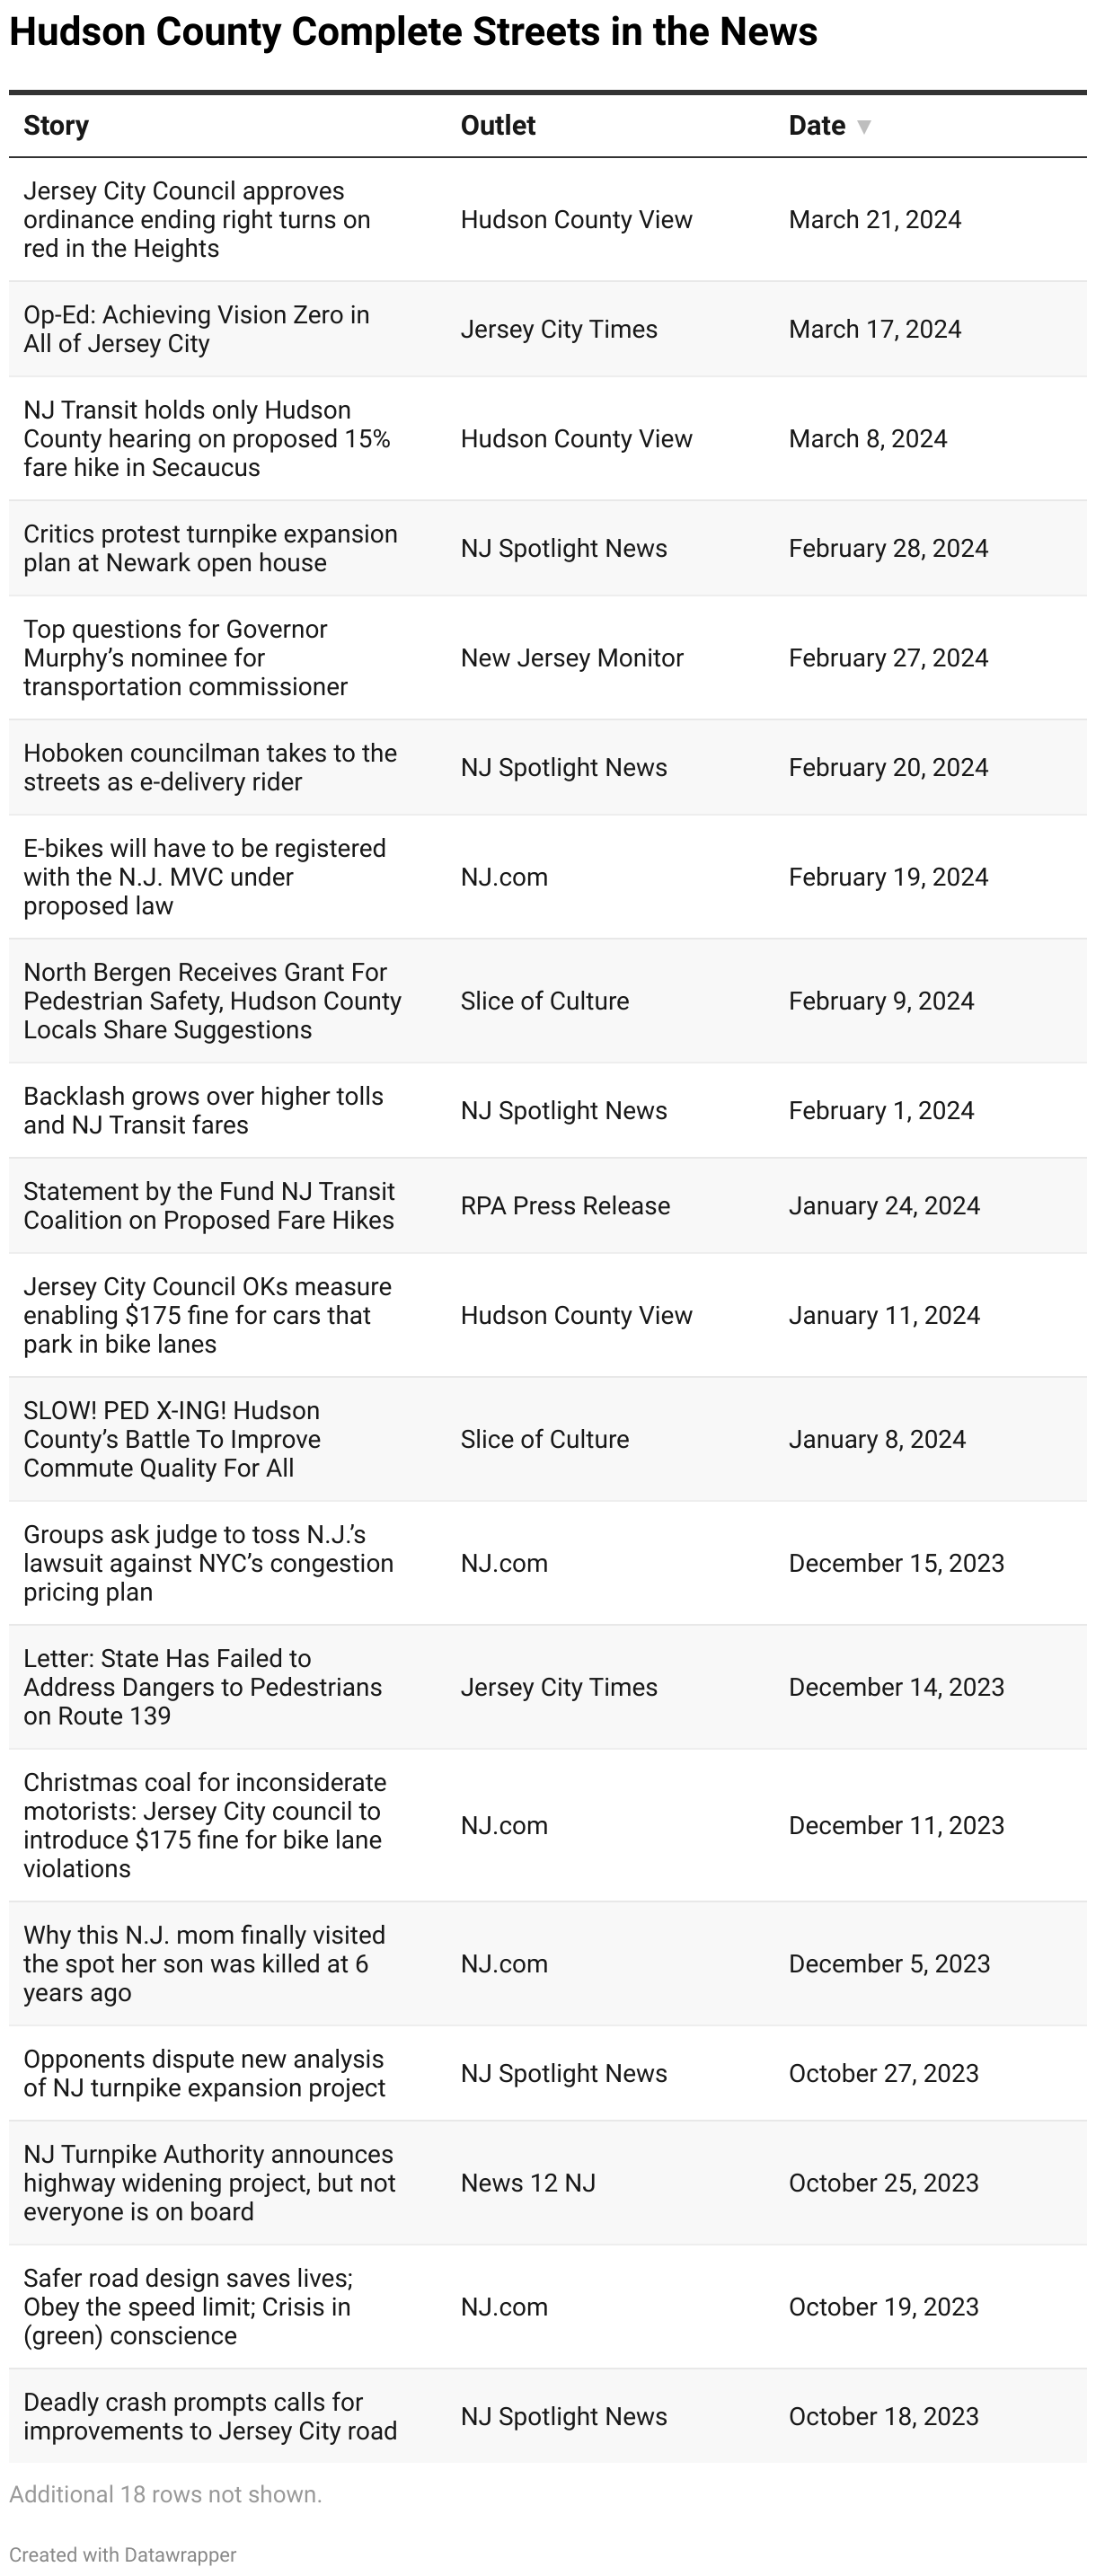 A table list of news stories covering Hudson County Complete Streets campaigns and street safety issues.